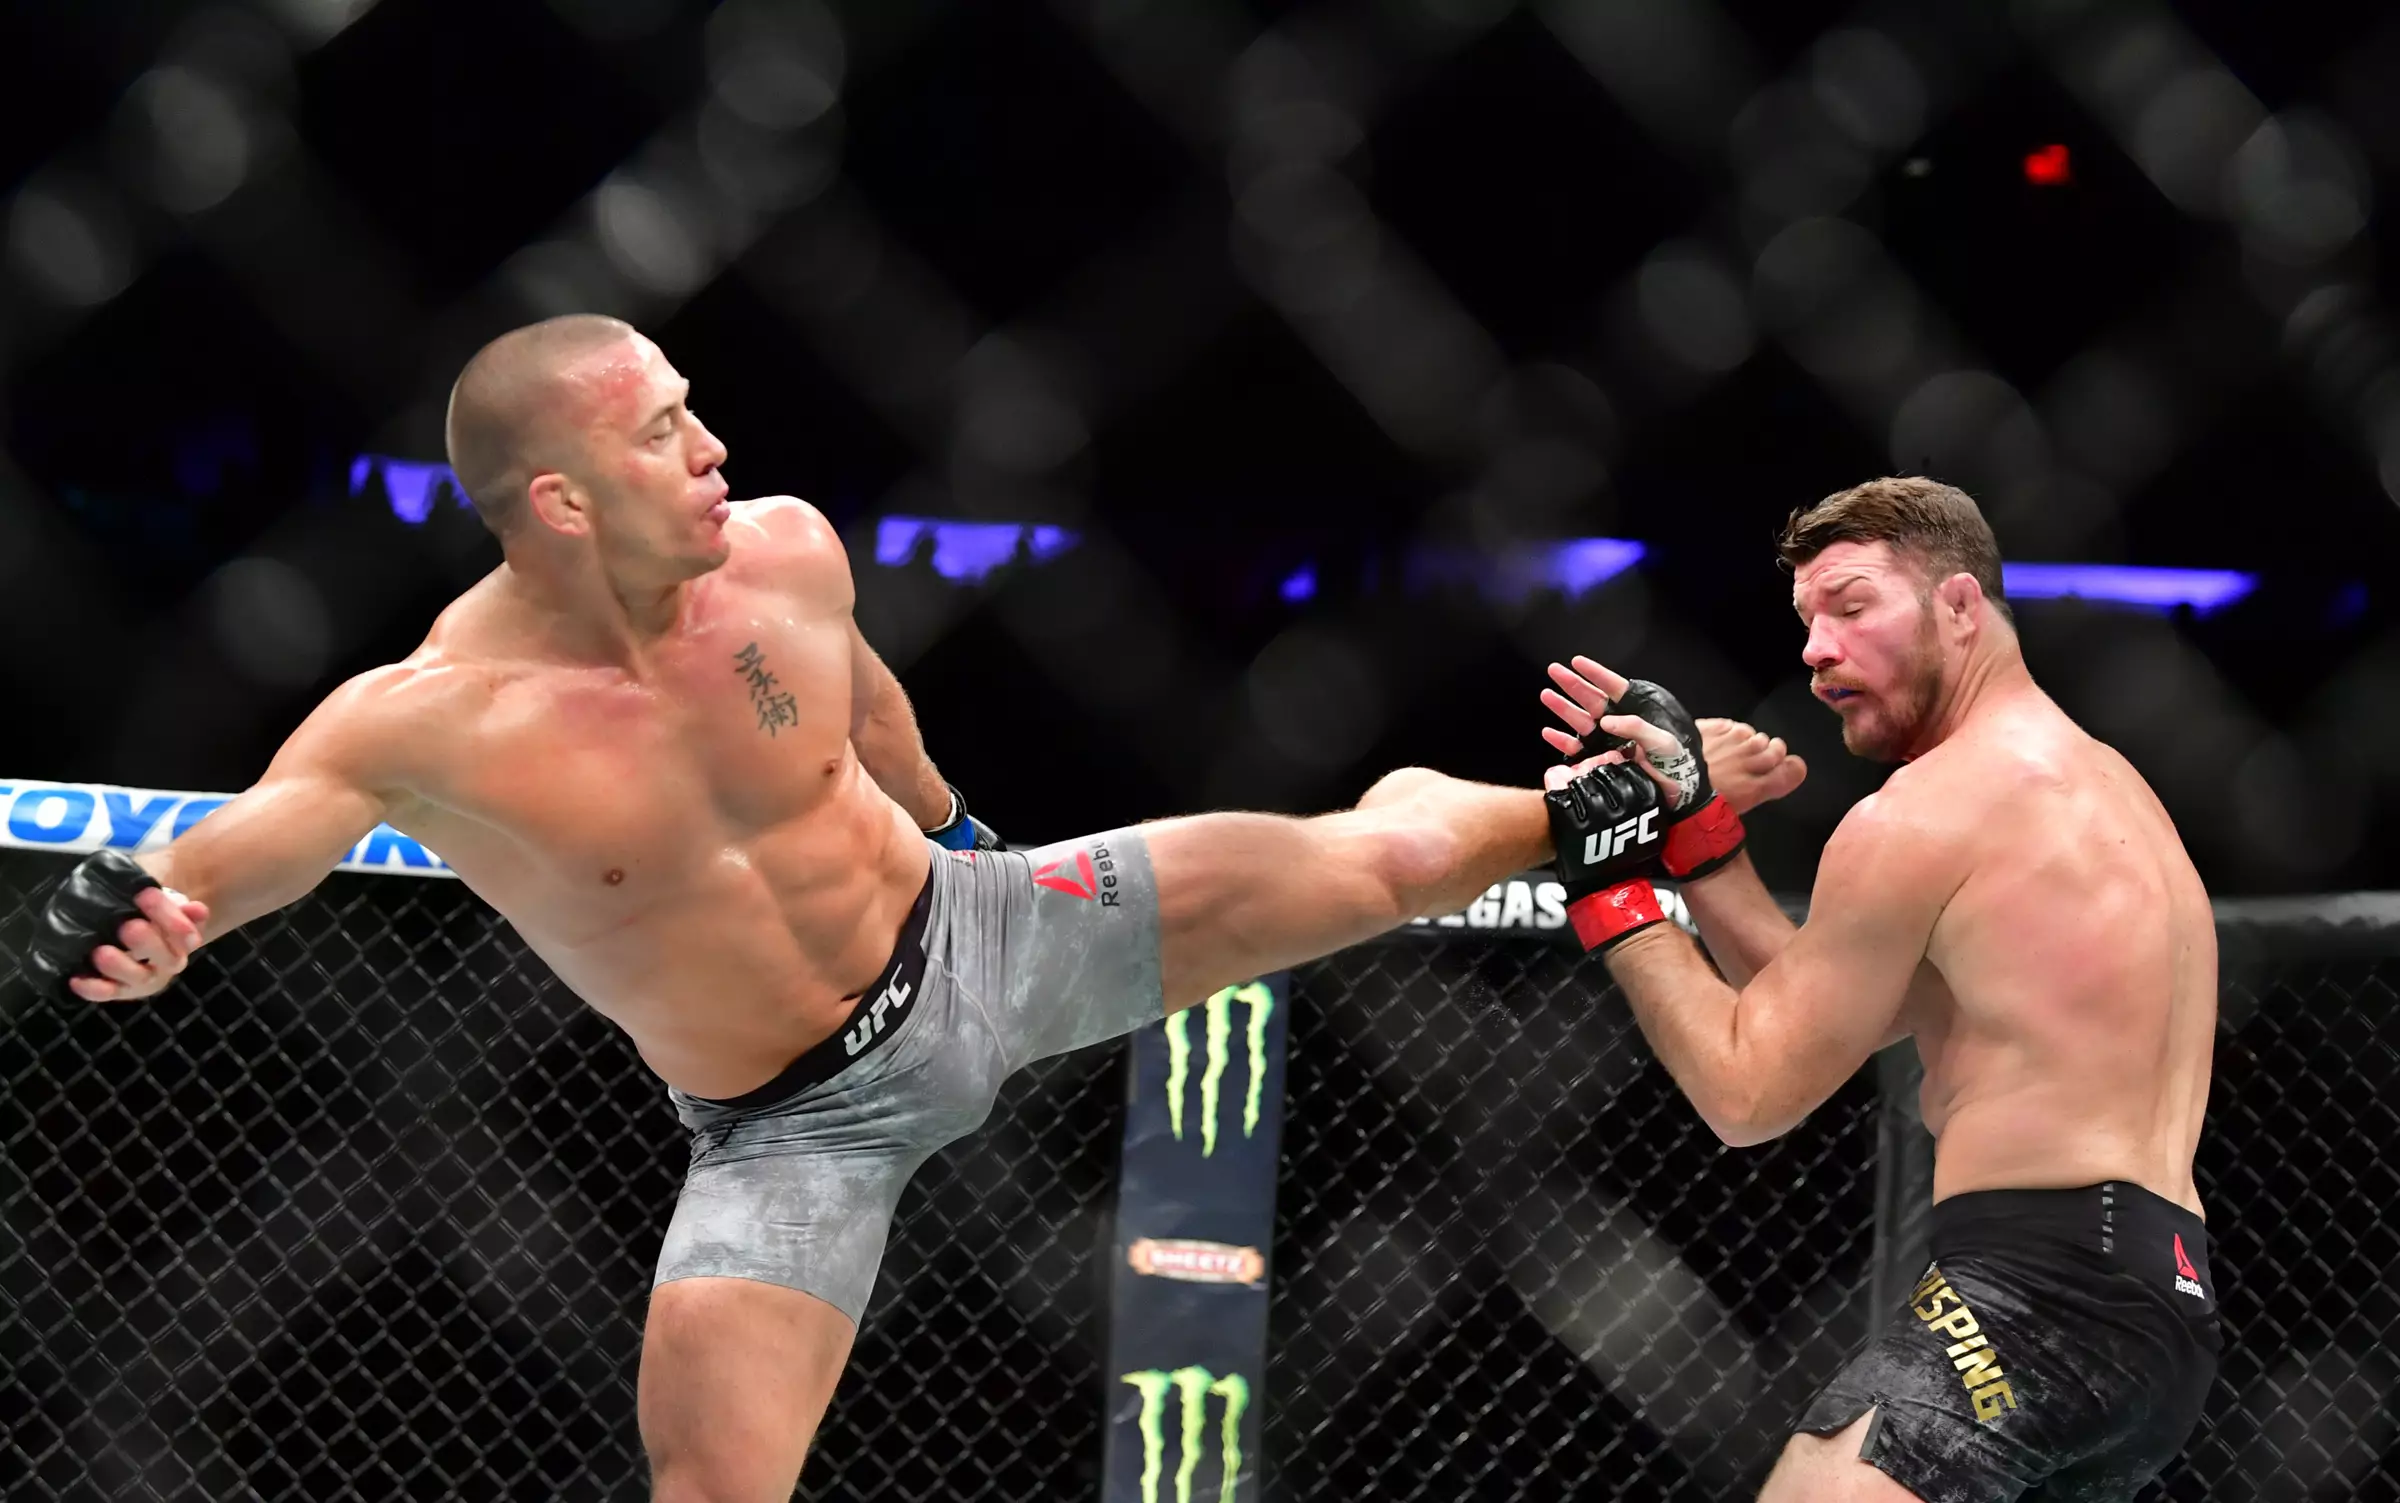 GSP made his comeback against Bisping at UFC 217 in Madison Square Garden.